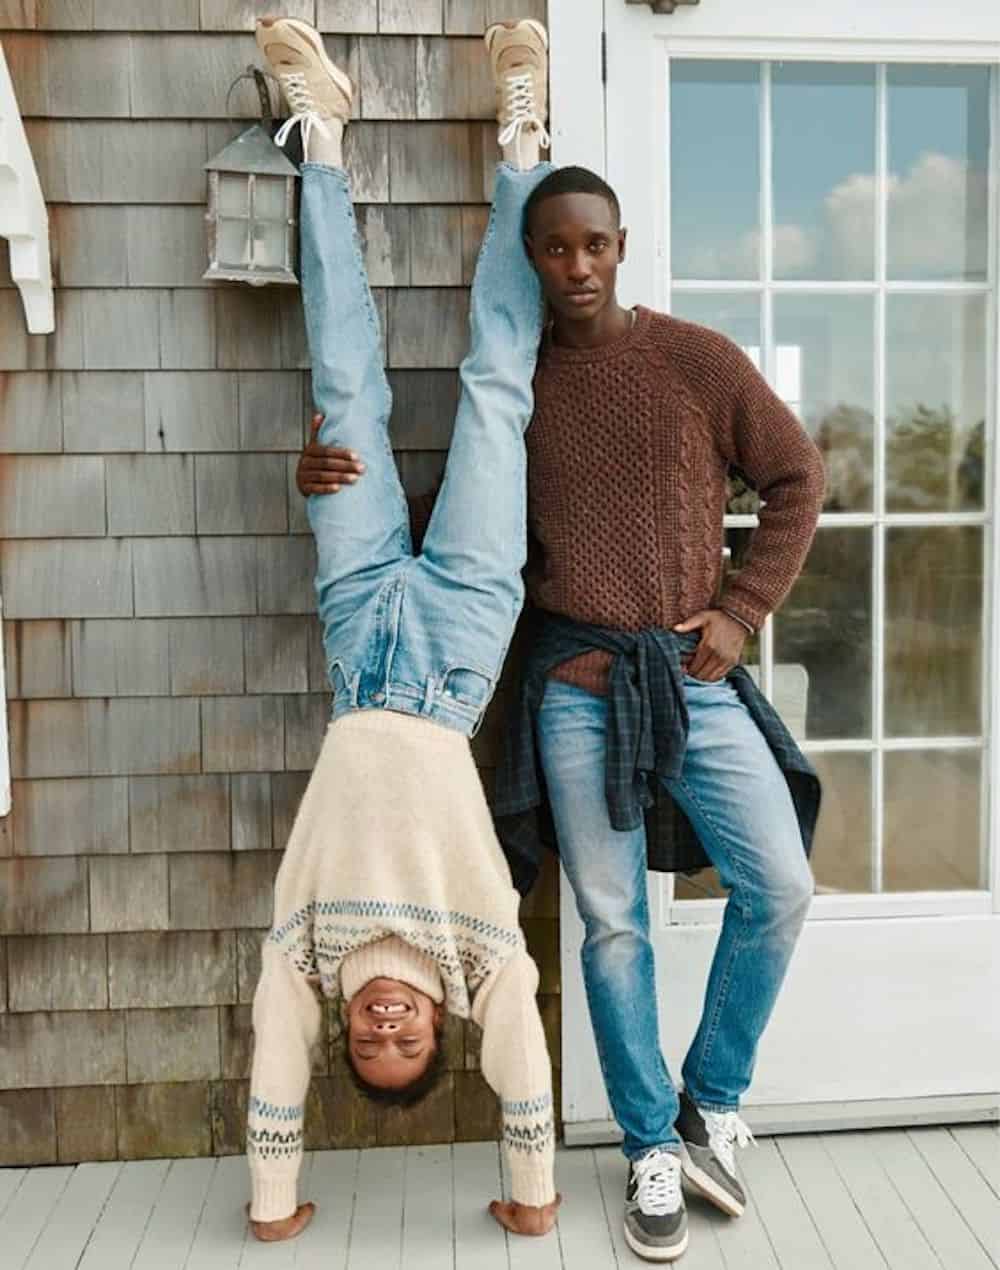 image of a black man and black woman standing in front of a house in jeans and sweaters and the woman is doing a handstand and smiling